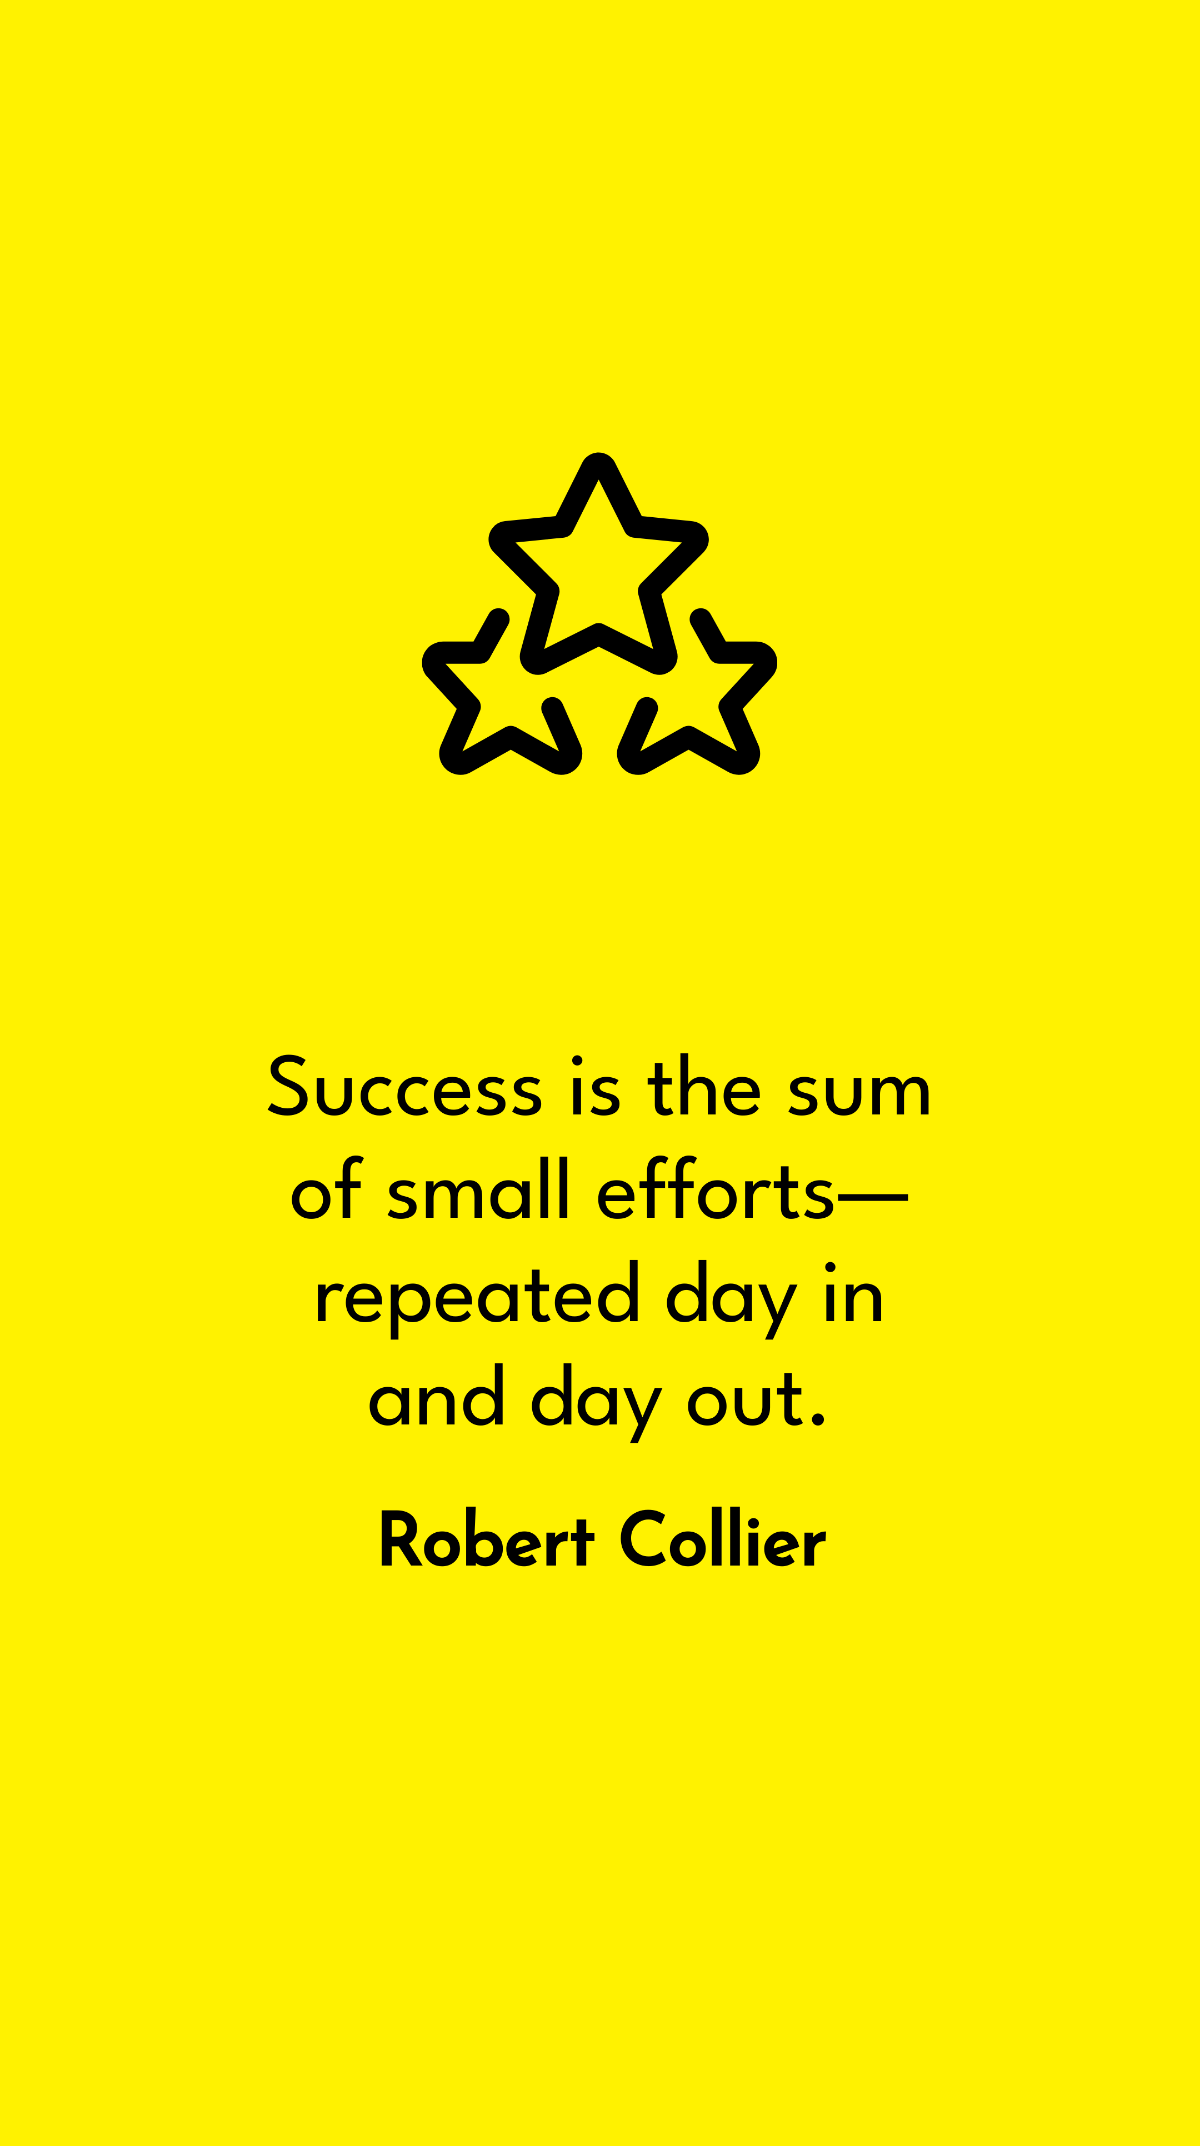 Robert Collier - Success is the sum of small efforts - repeated day in and day out. Template